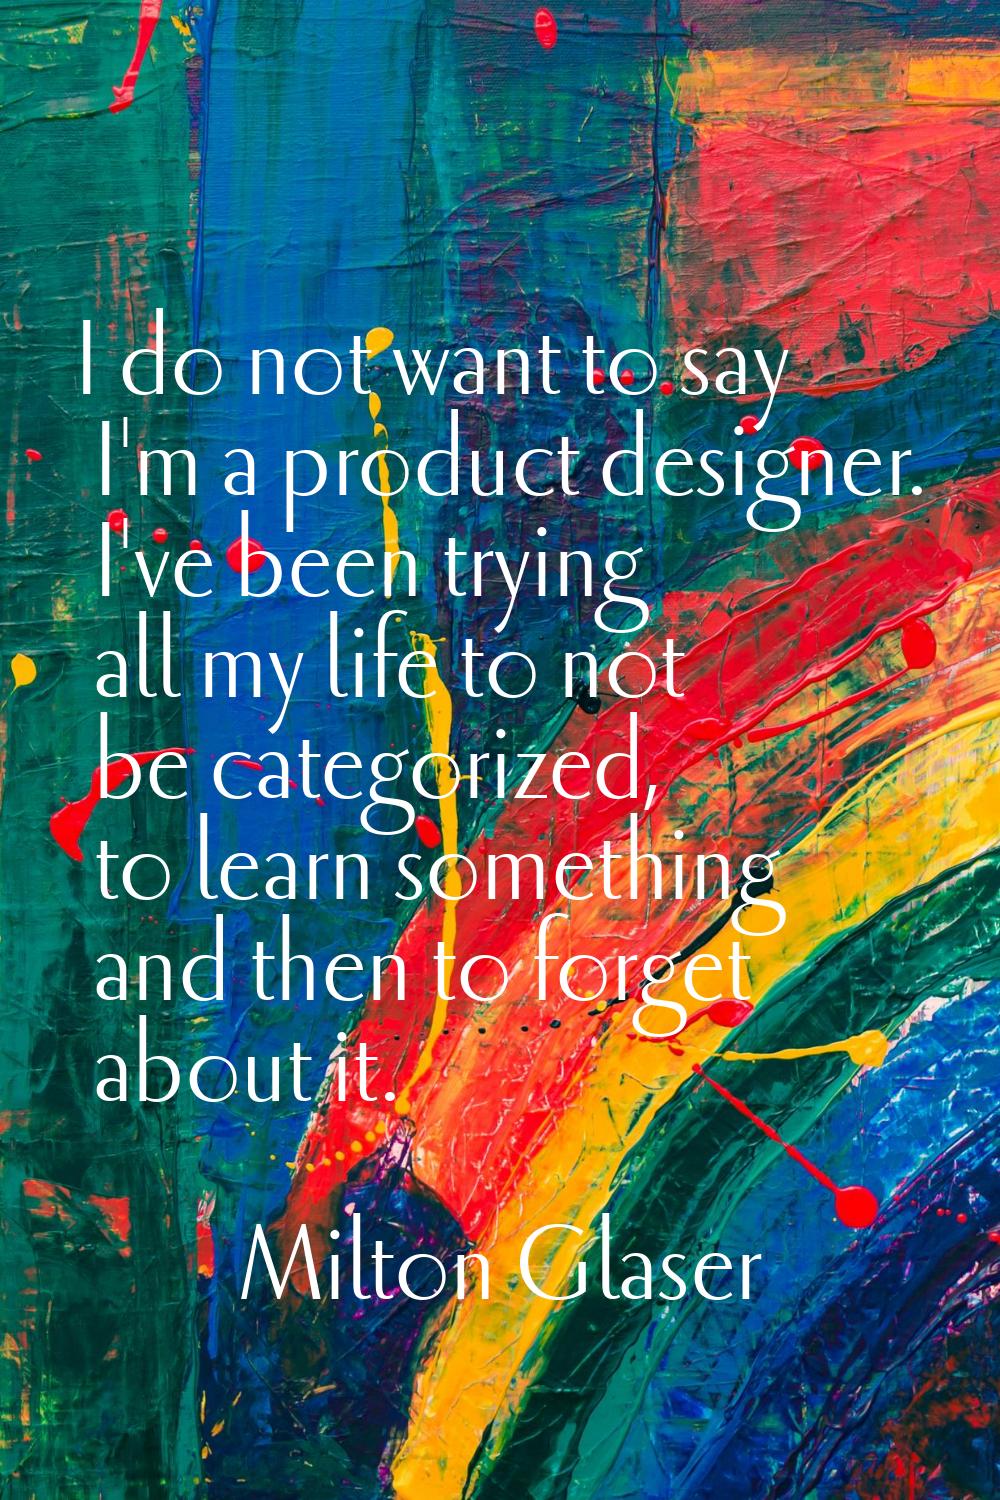 I do not want to say I'm a product designer. I've been trying all my life to not be categorized, to